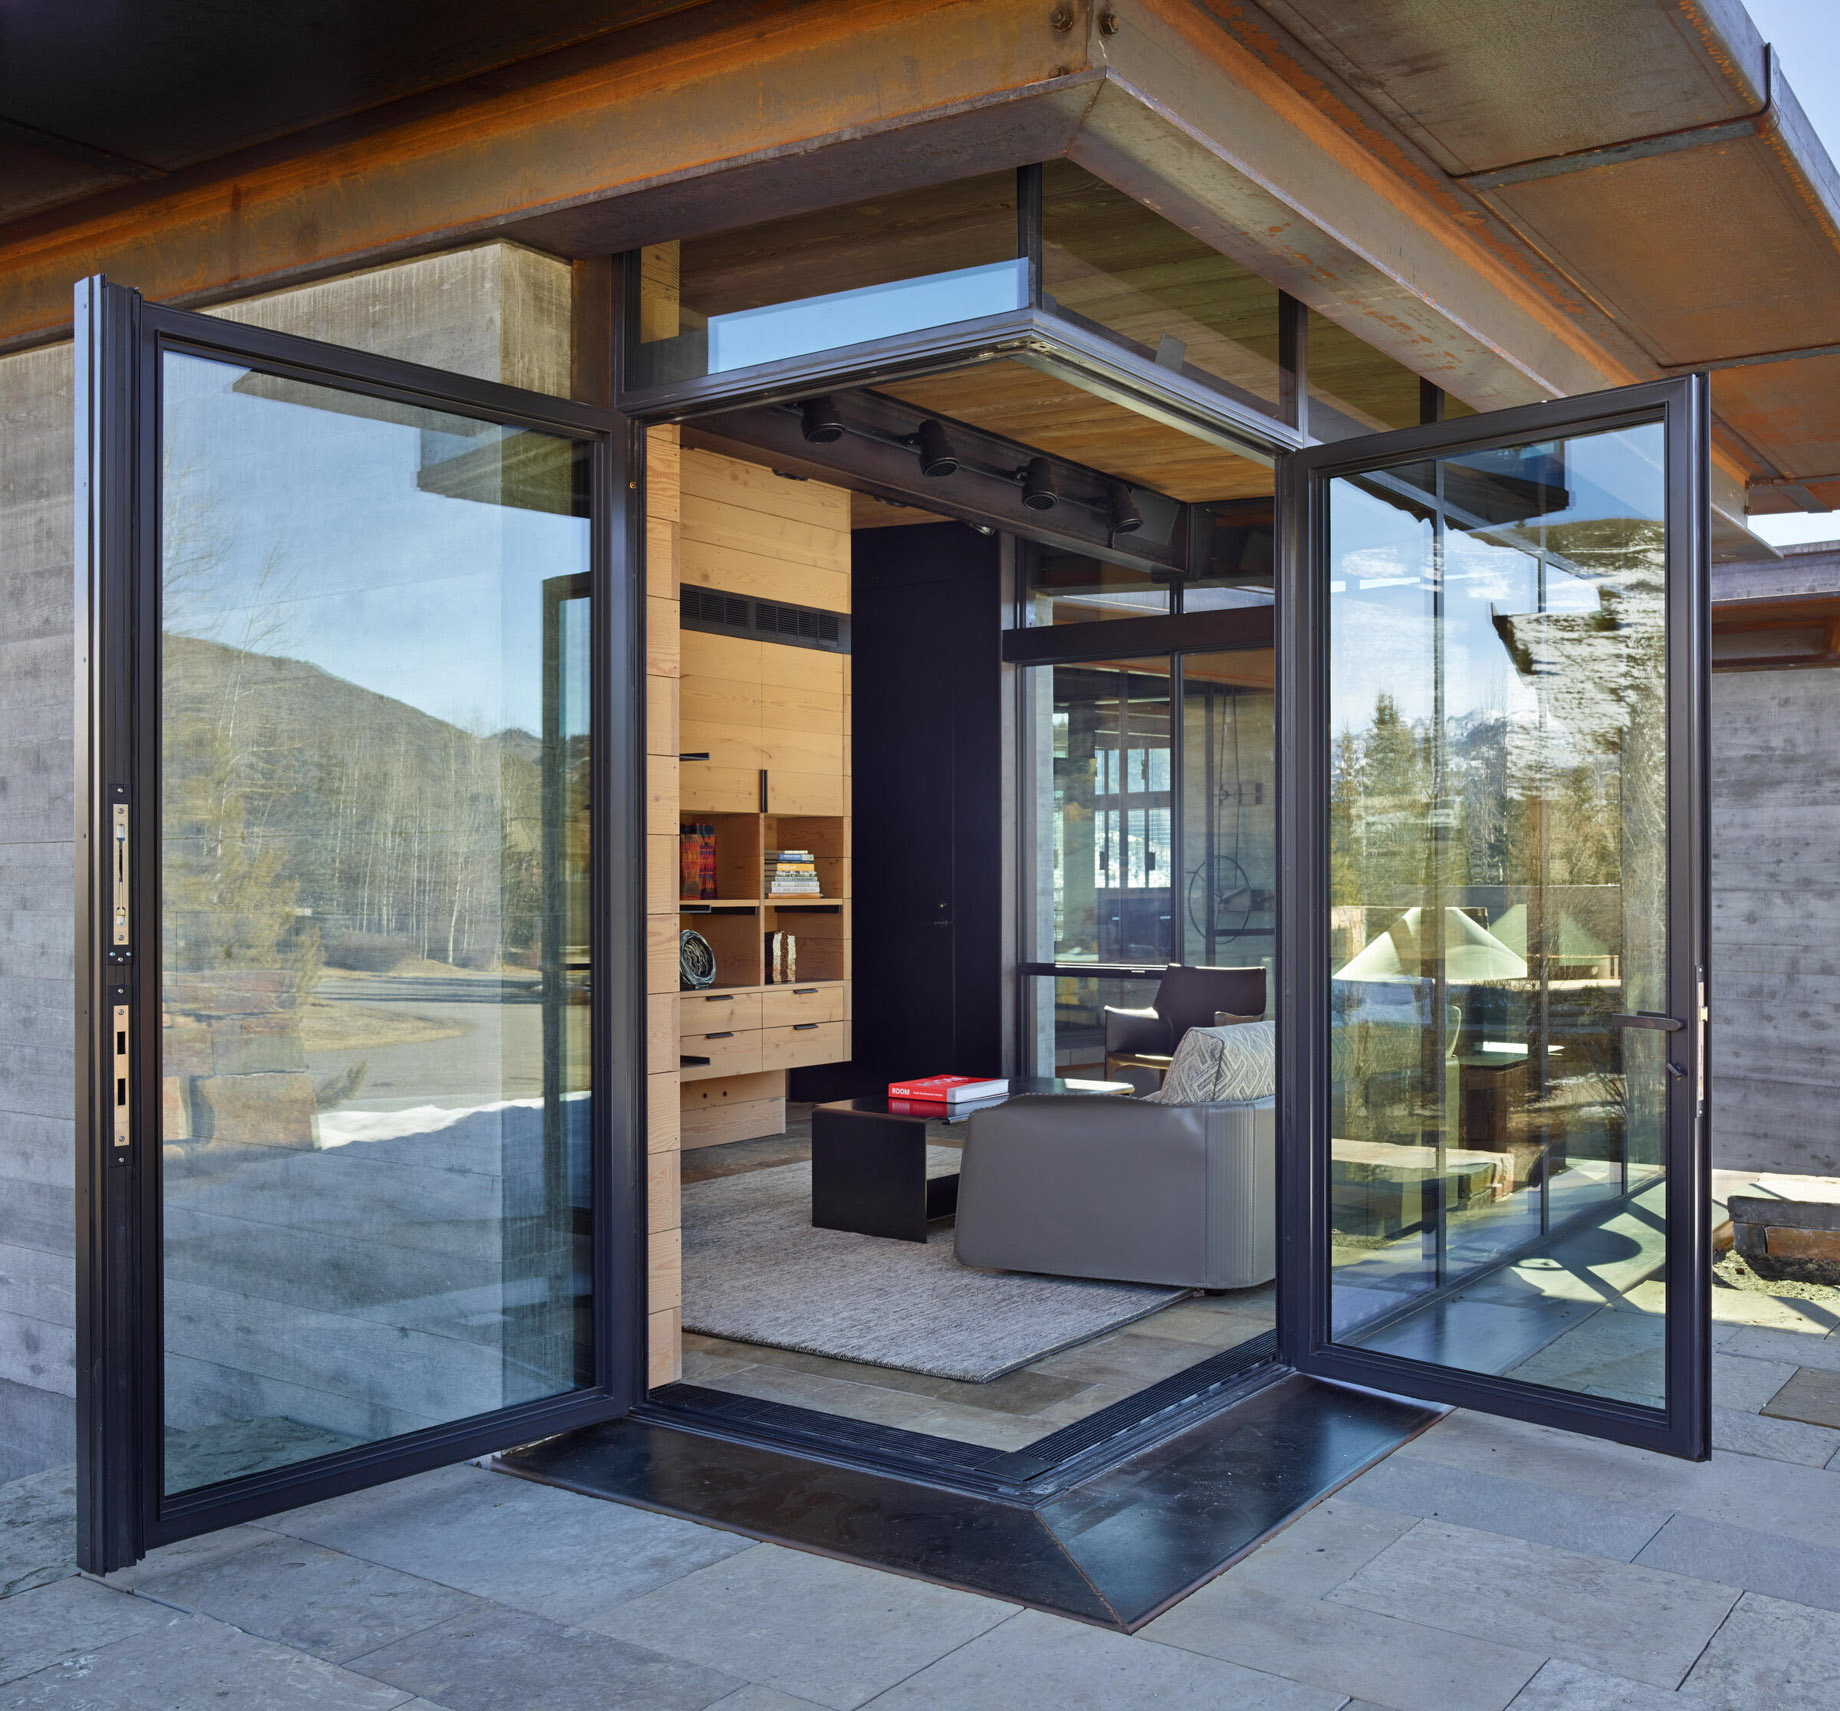 Bigwood Sun Valley Residence – Griffin Ct, Ketchum, ID, USA – Modern Industrial Home Design